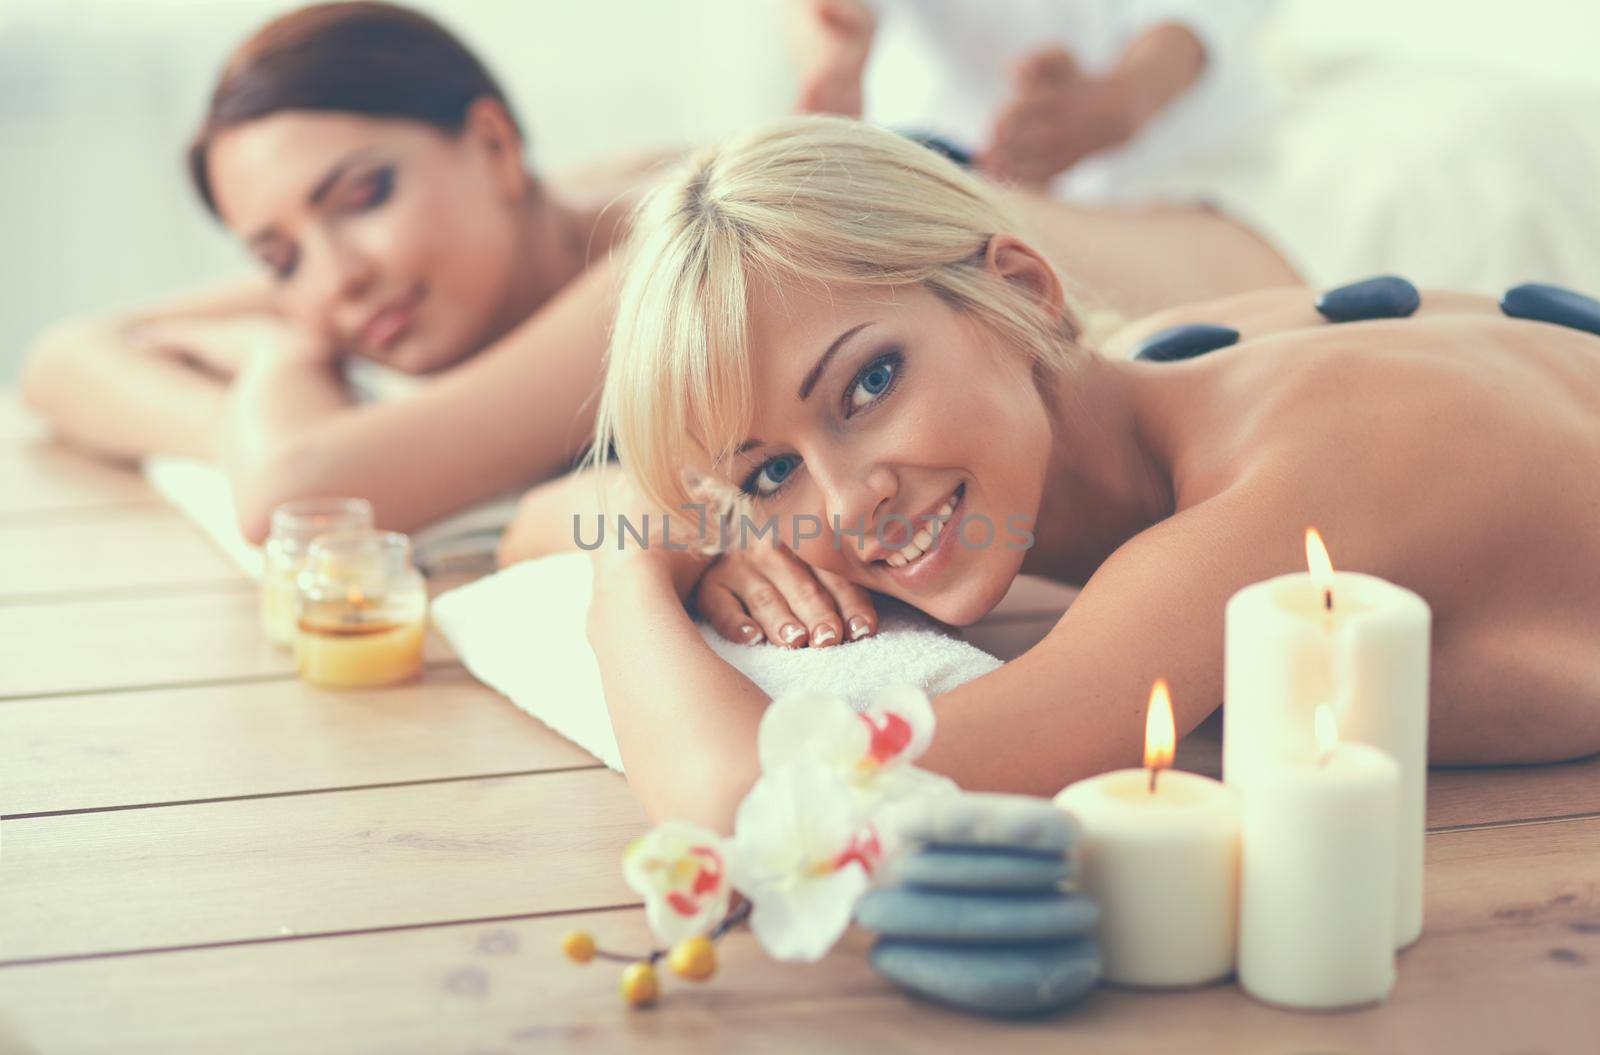 Two young beautiful women relaxing and enjoying at the spa cent.